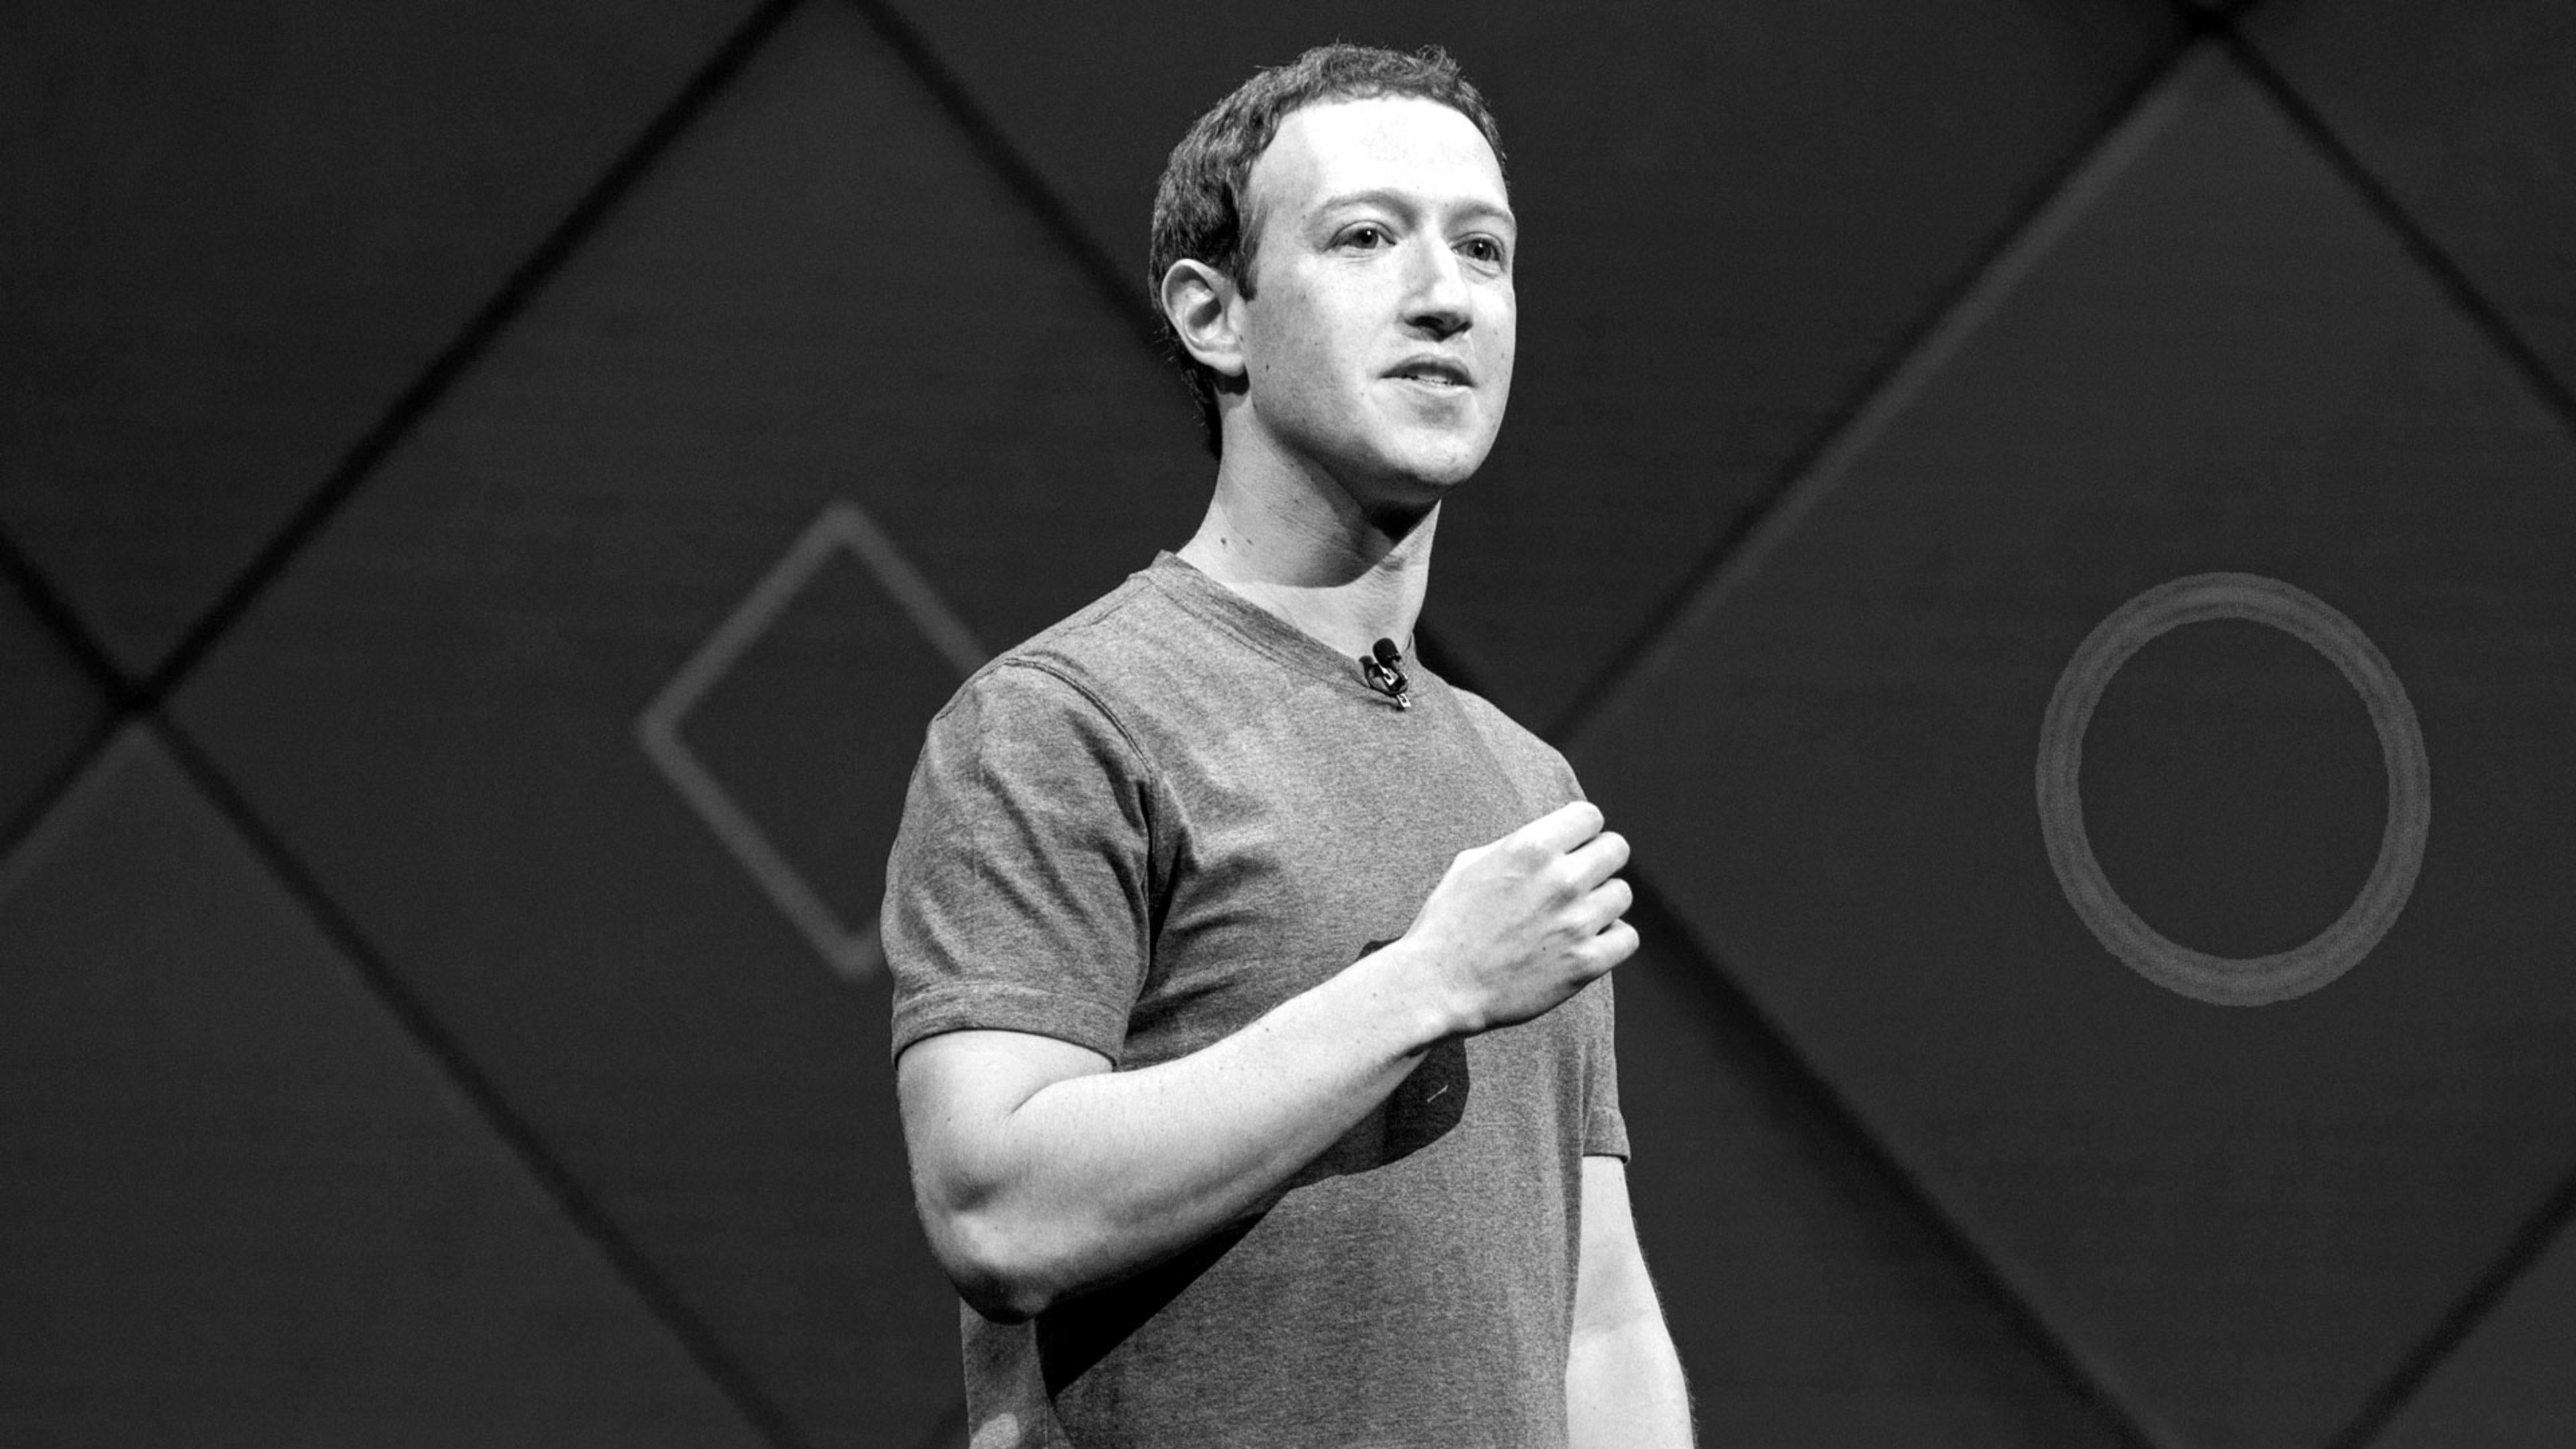 Mark Zuckerberg: Congress must act to protect Dreamers